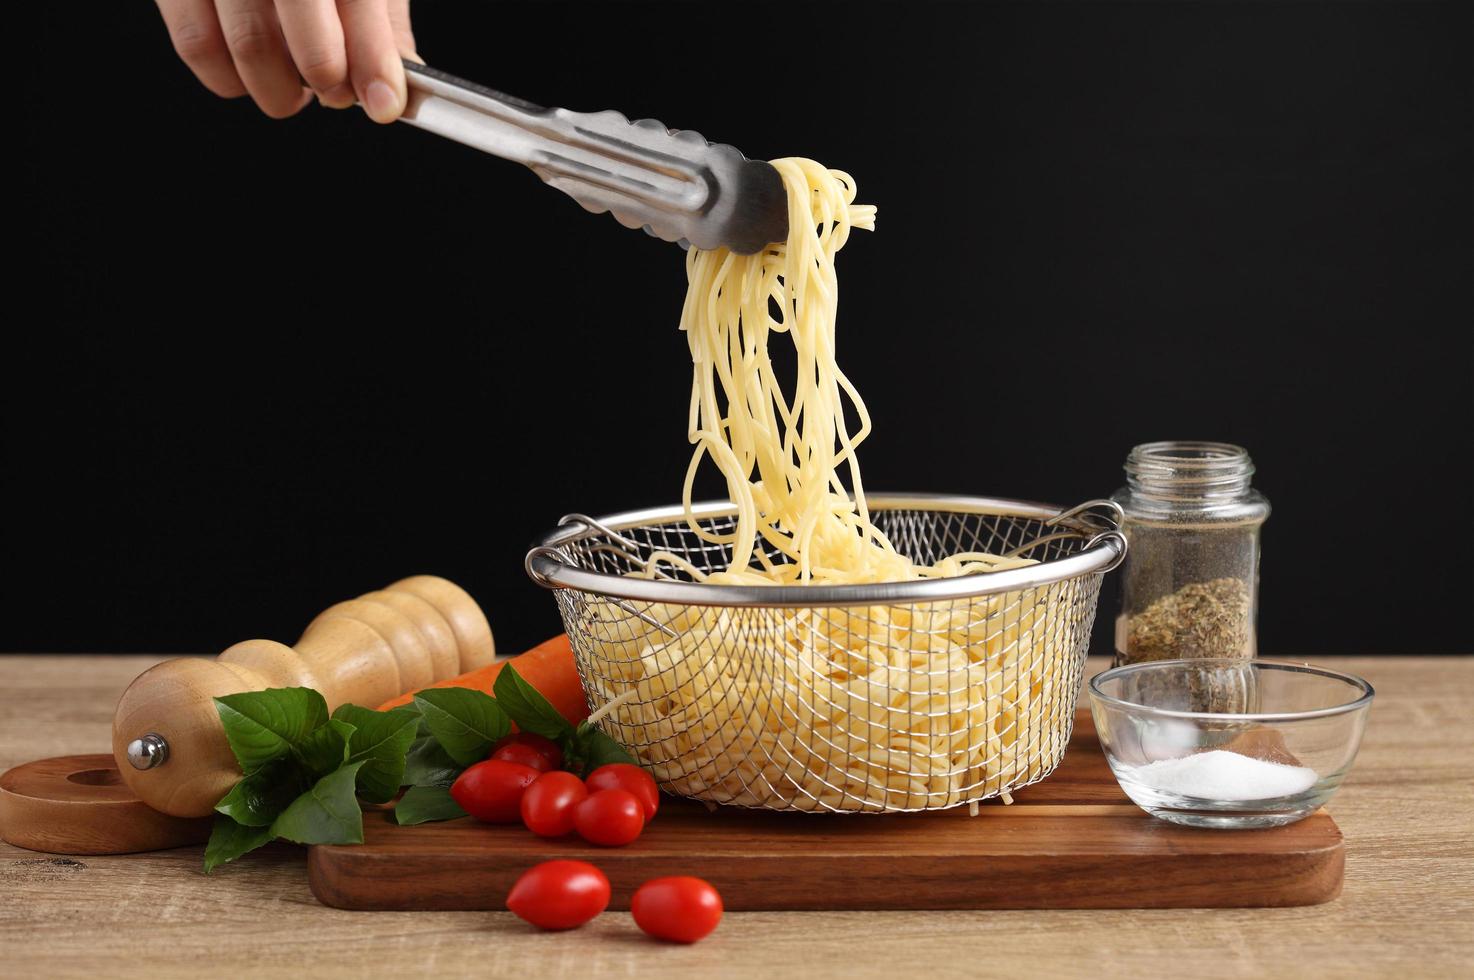 Hand holding tongs and cooked spaghetti from metal colander photo